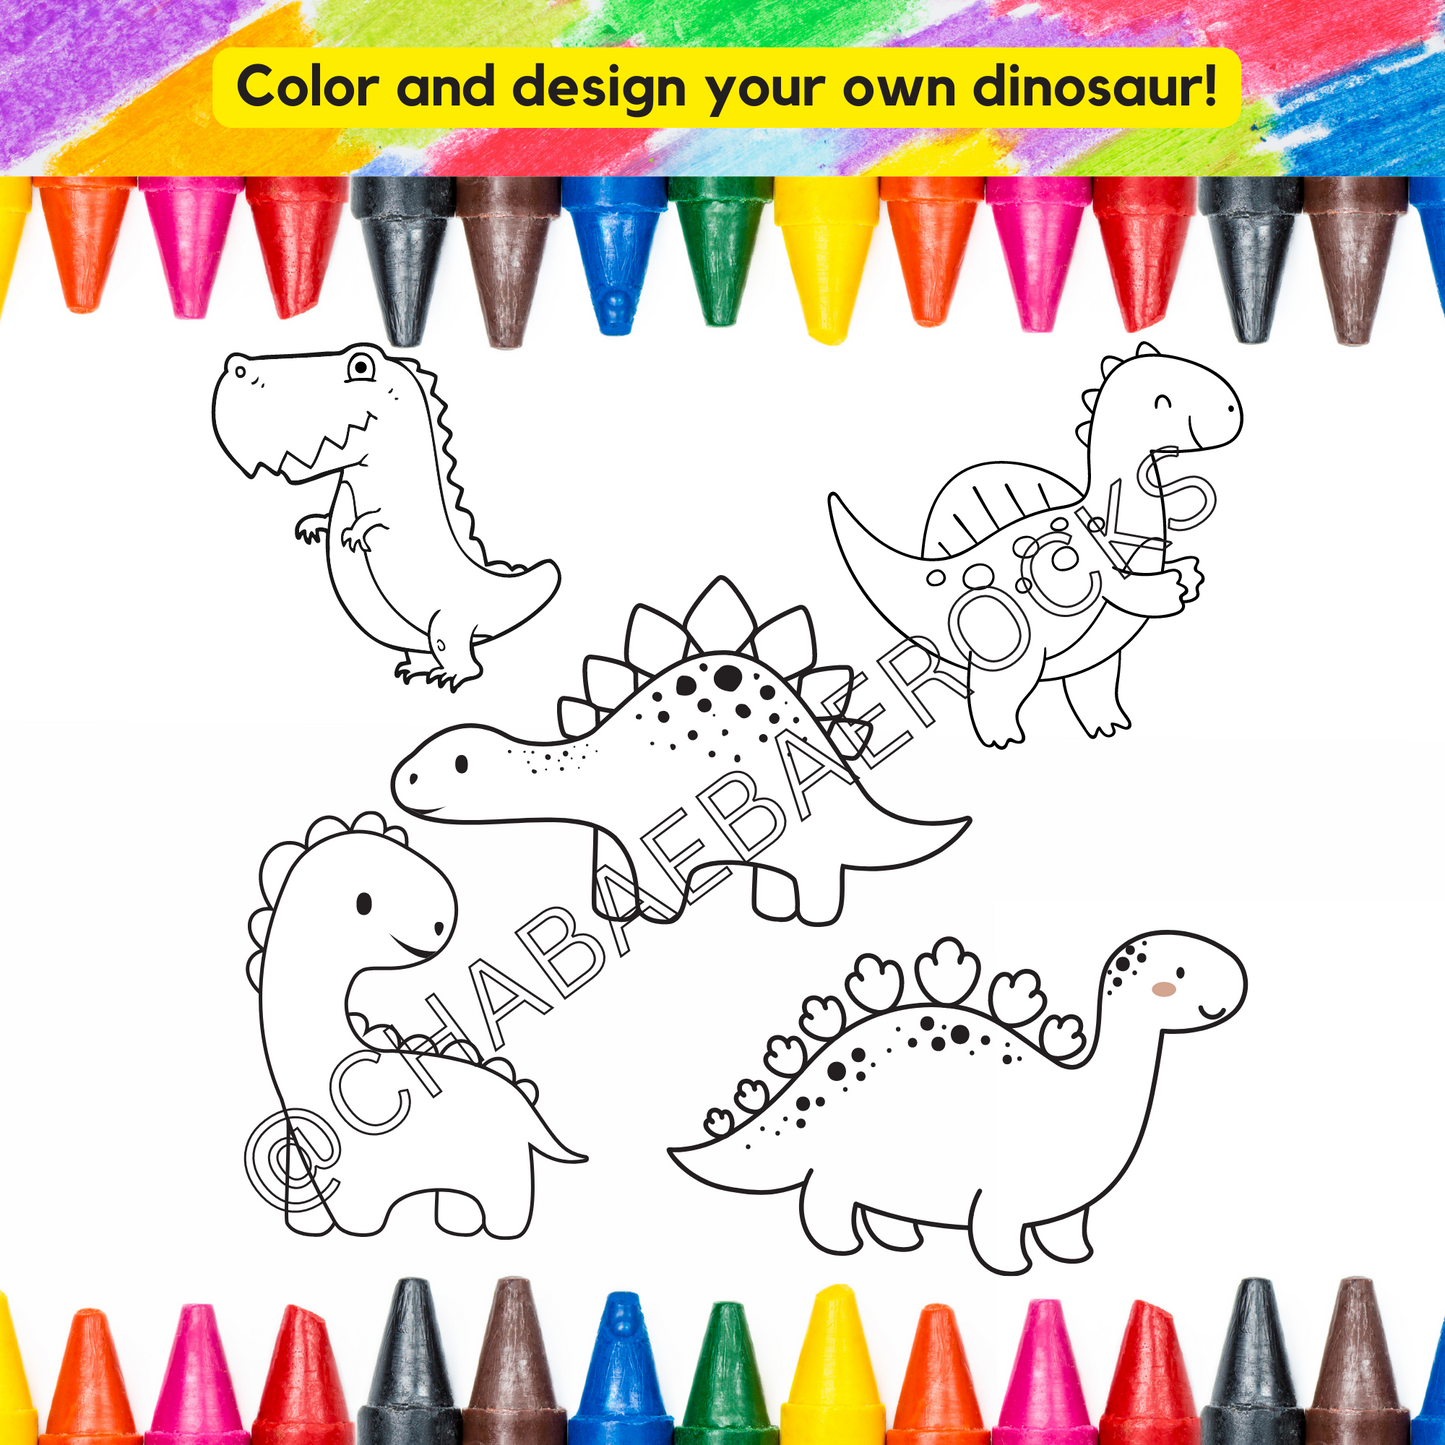 Design Your Own Dinosaur Coloring Pages, Printable